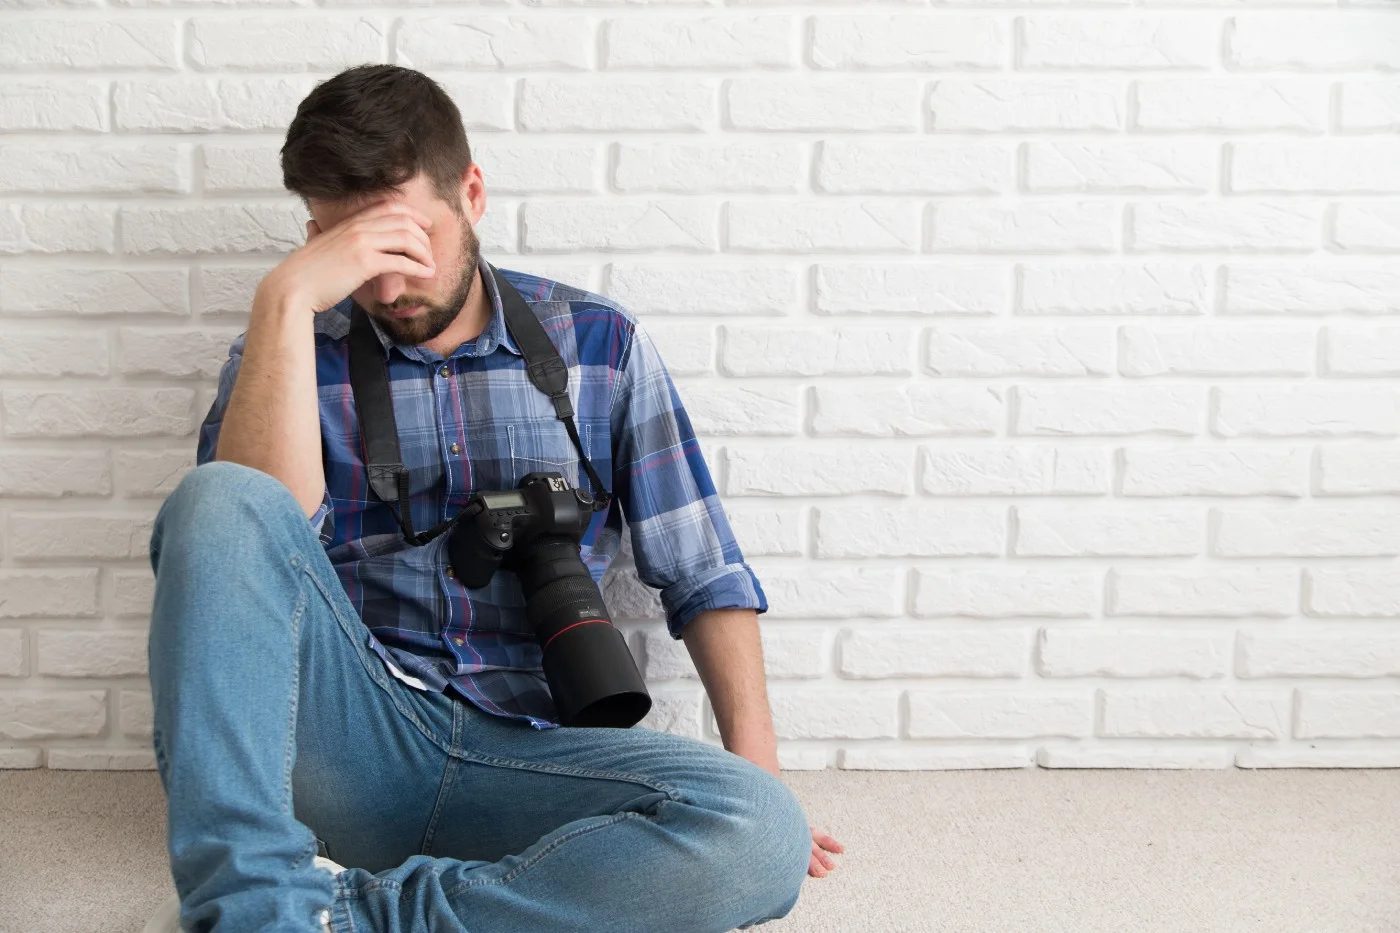 upset photographer trying to figure out what to start as a new photographer